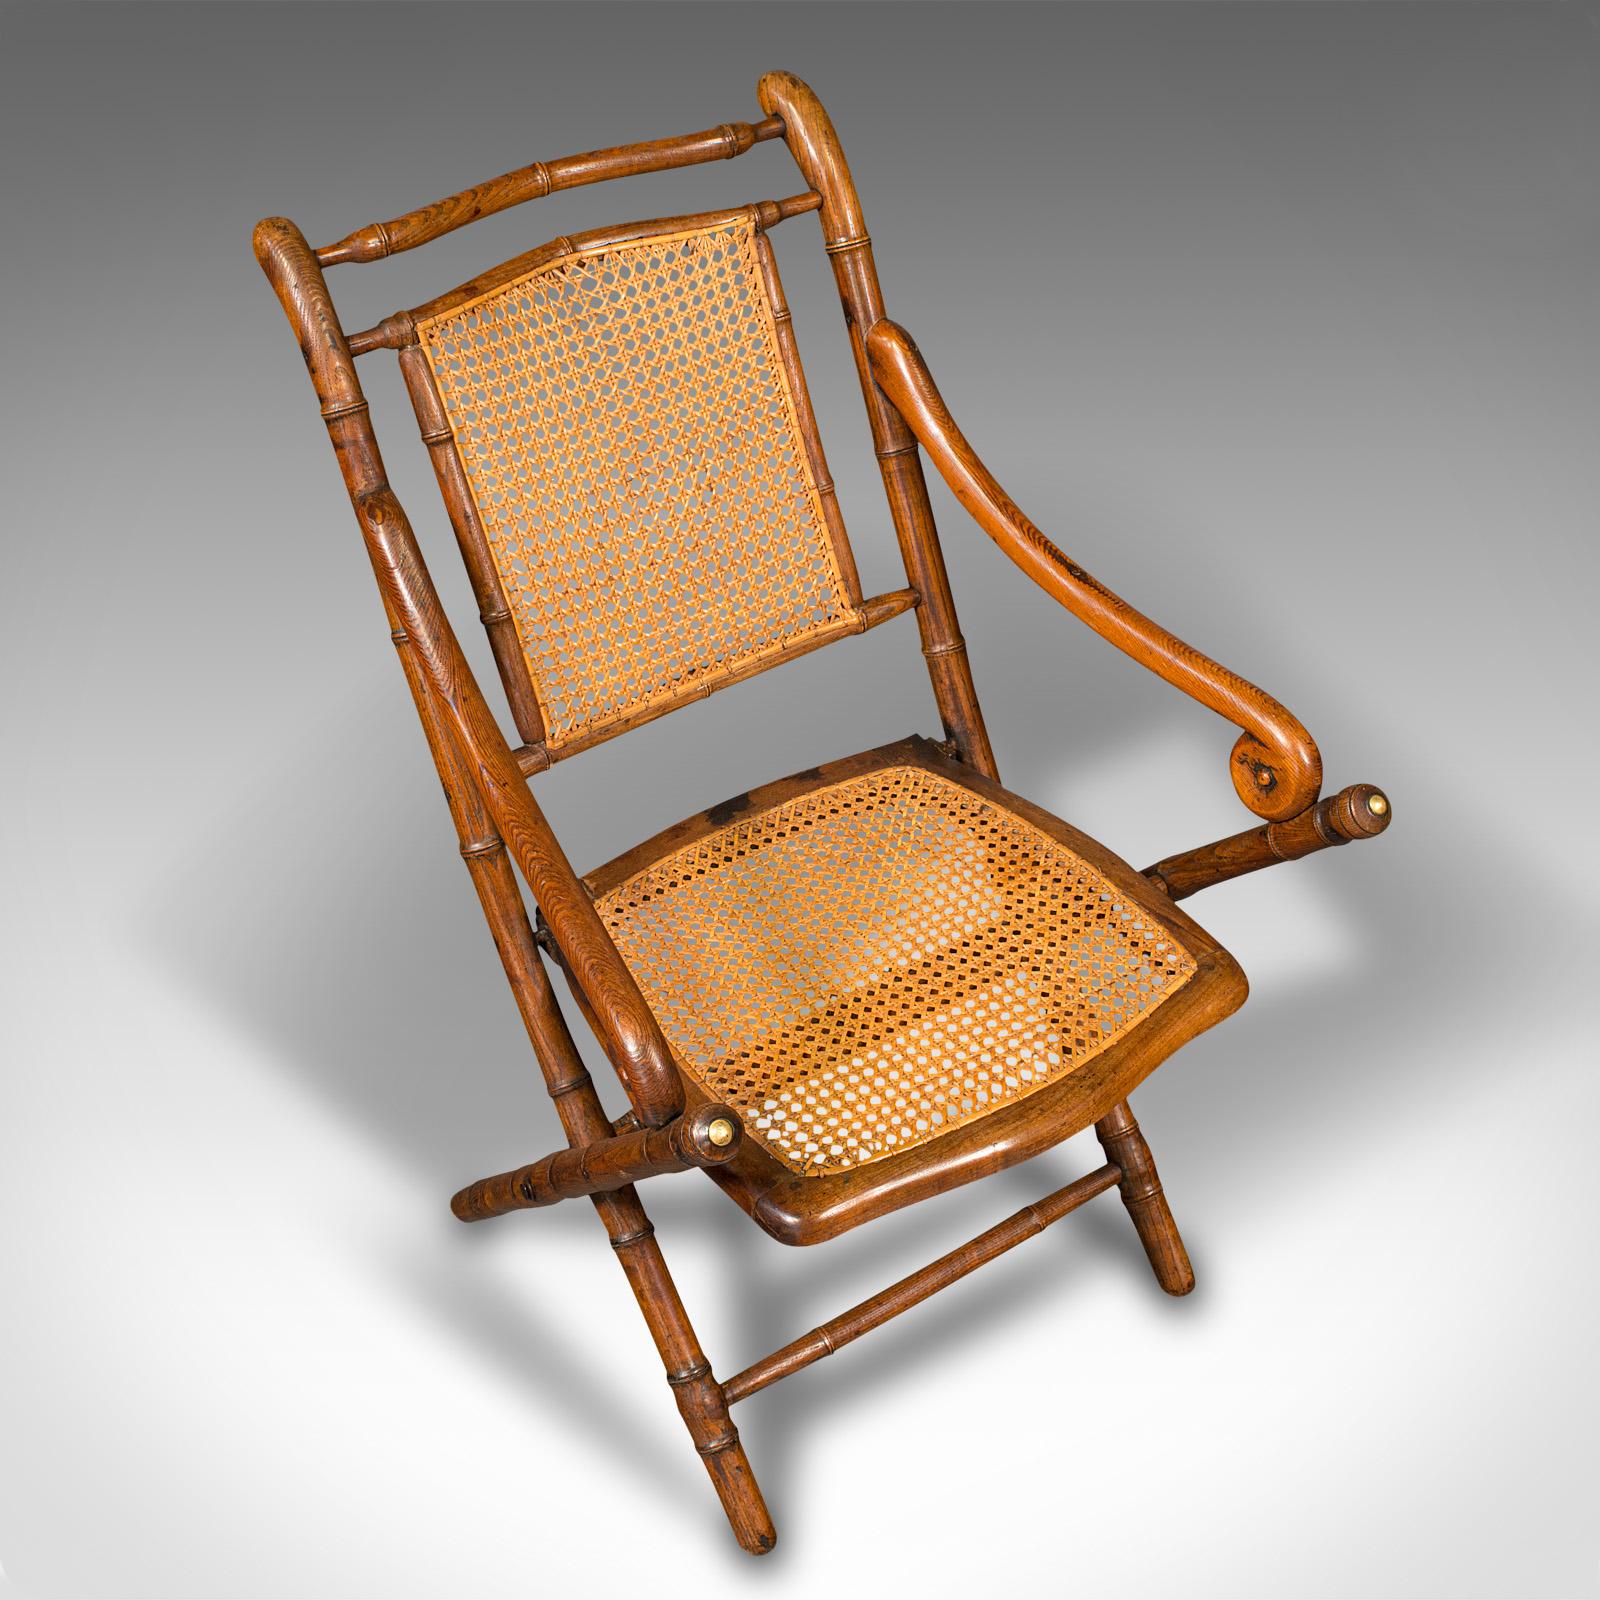 19th Century Antique Veranda Chair, Anglo Indian, Bentwood, Colonial Seat, Victorian, C.1870